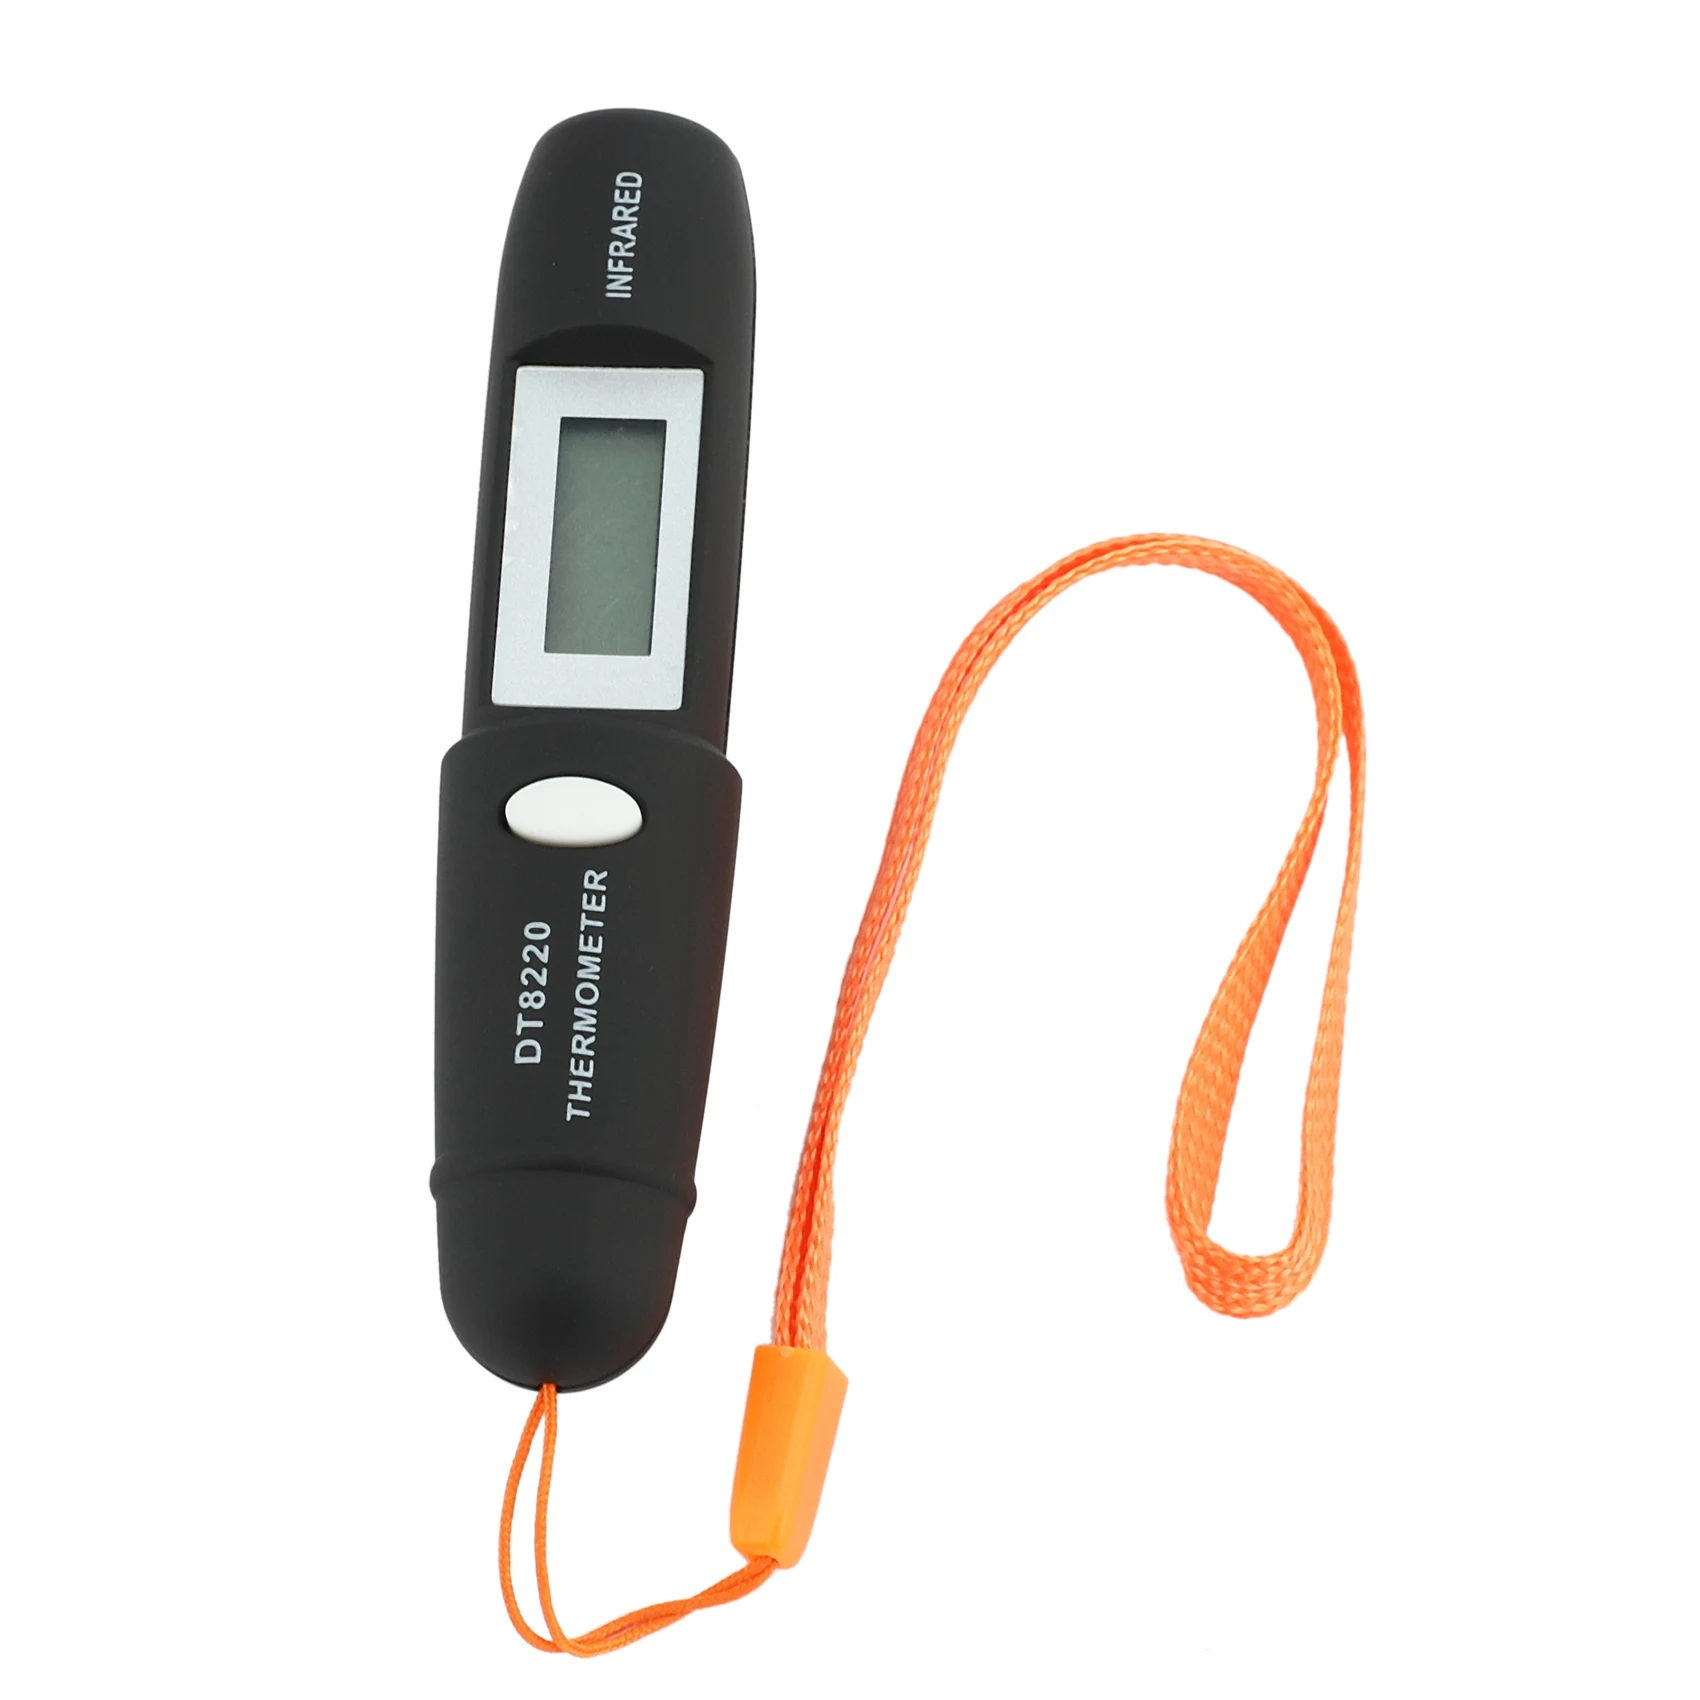 

Non-Contact Mini Infrared Thermometer IR Temperature Measuring Digital LCD Display Infrared Thermometer Pen DT8220 Black